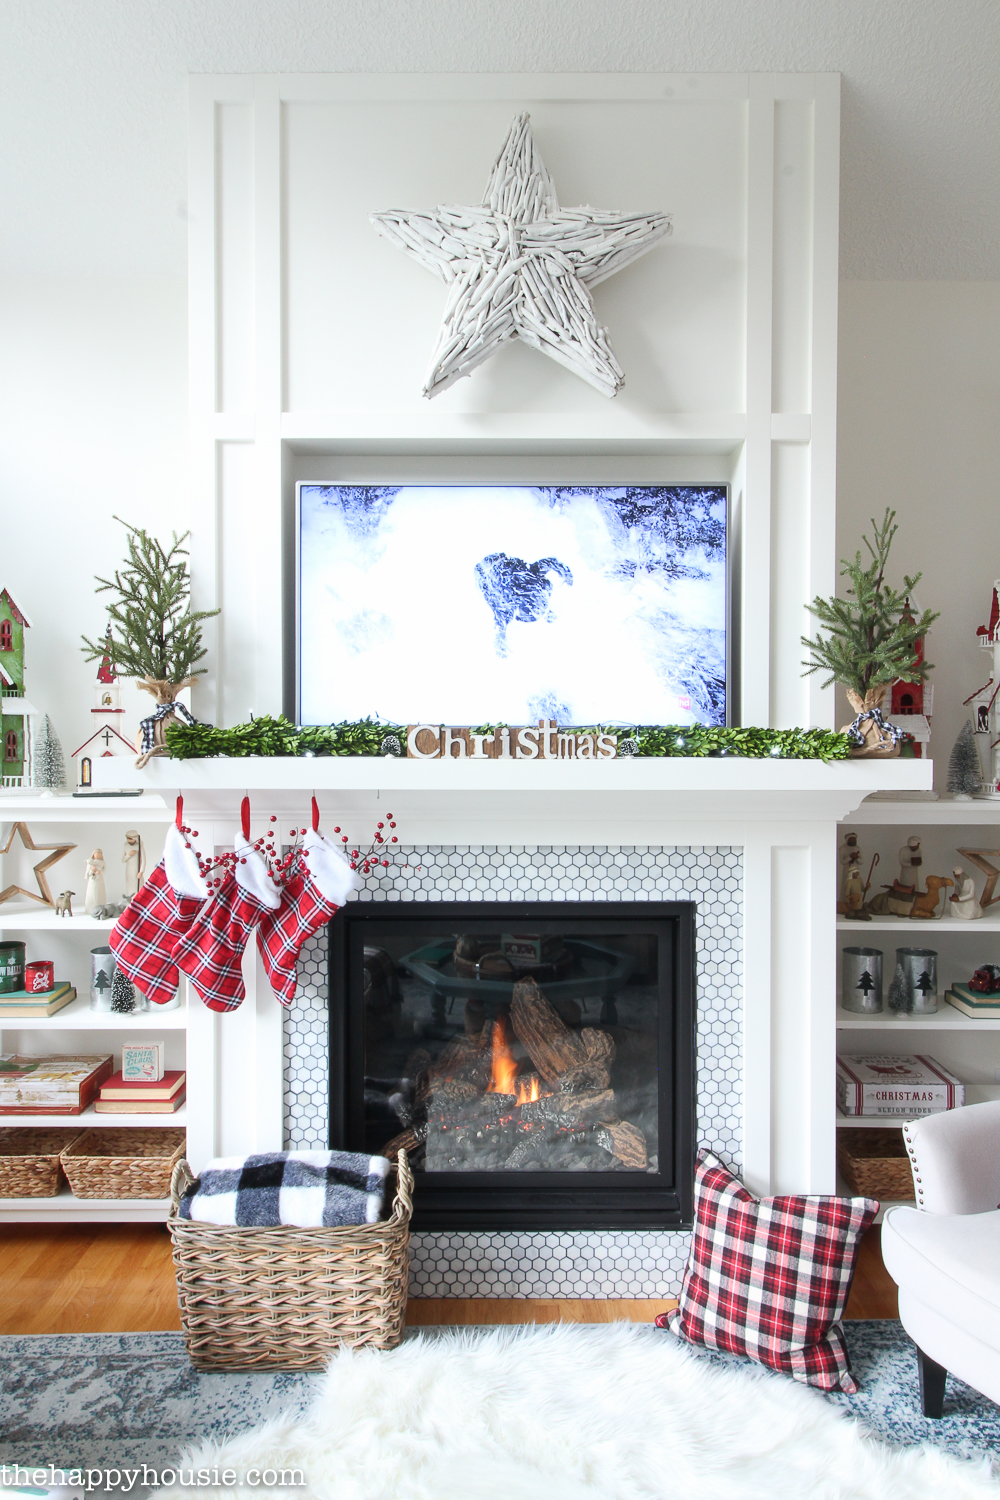 A white fireplace mantel with a white fur rug in front of it.